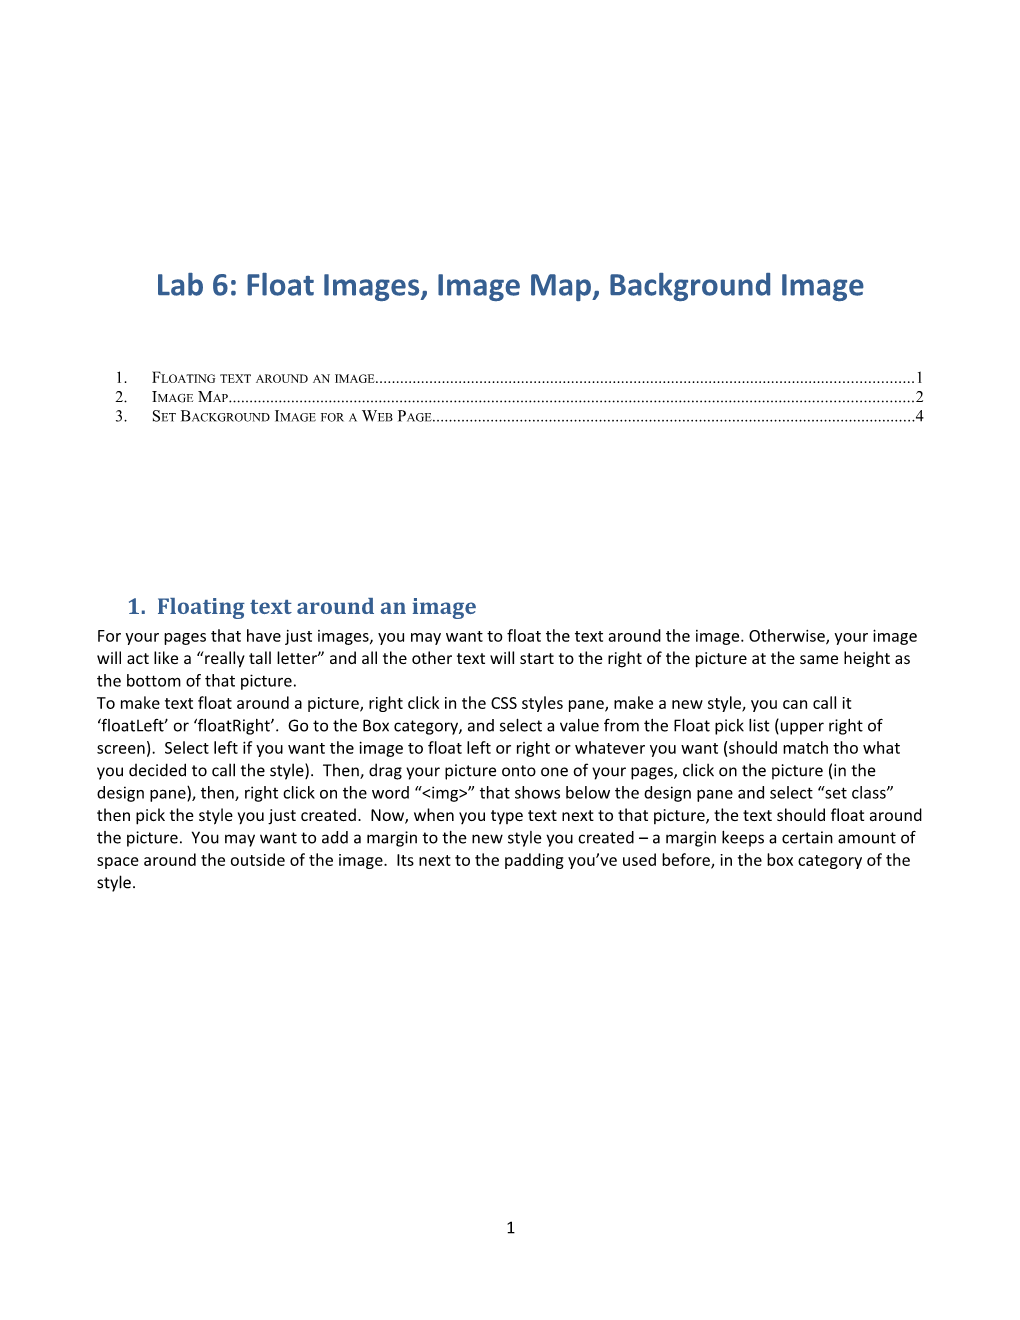 Lab 5: Image Gallery, Image Map, and Email Link